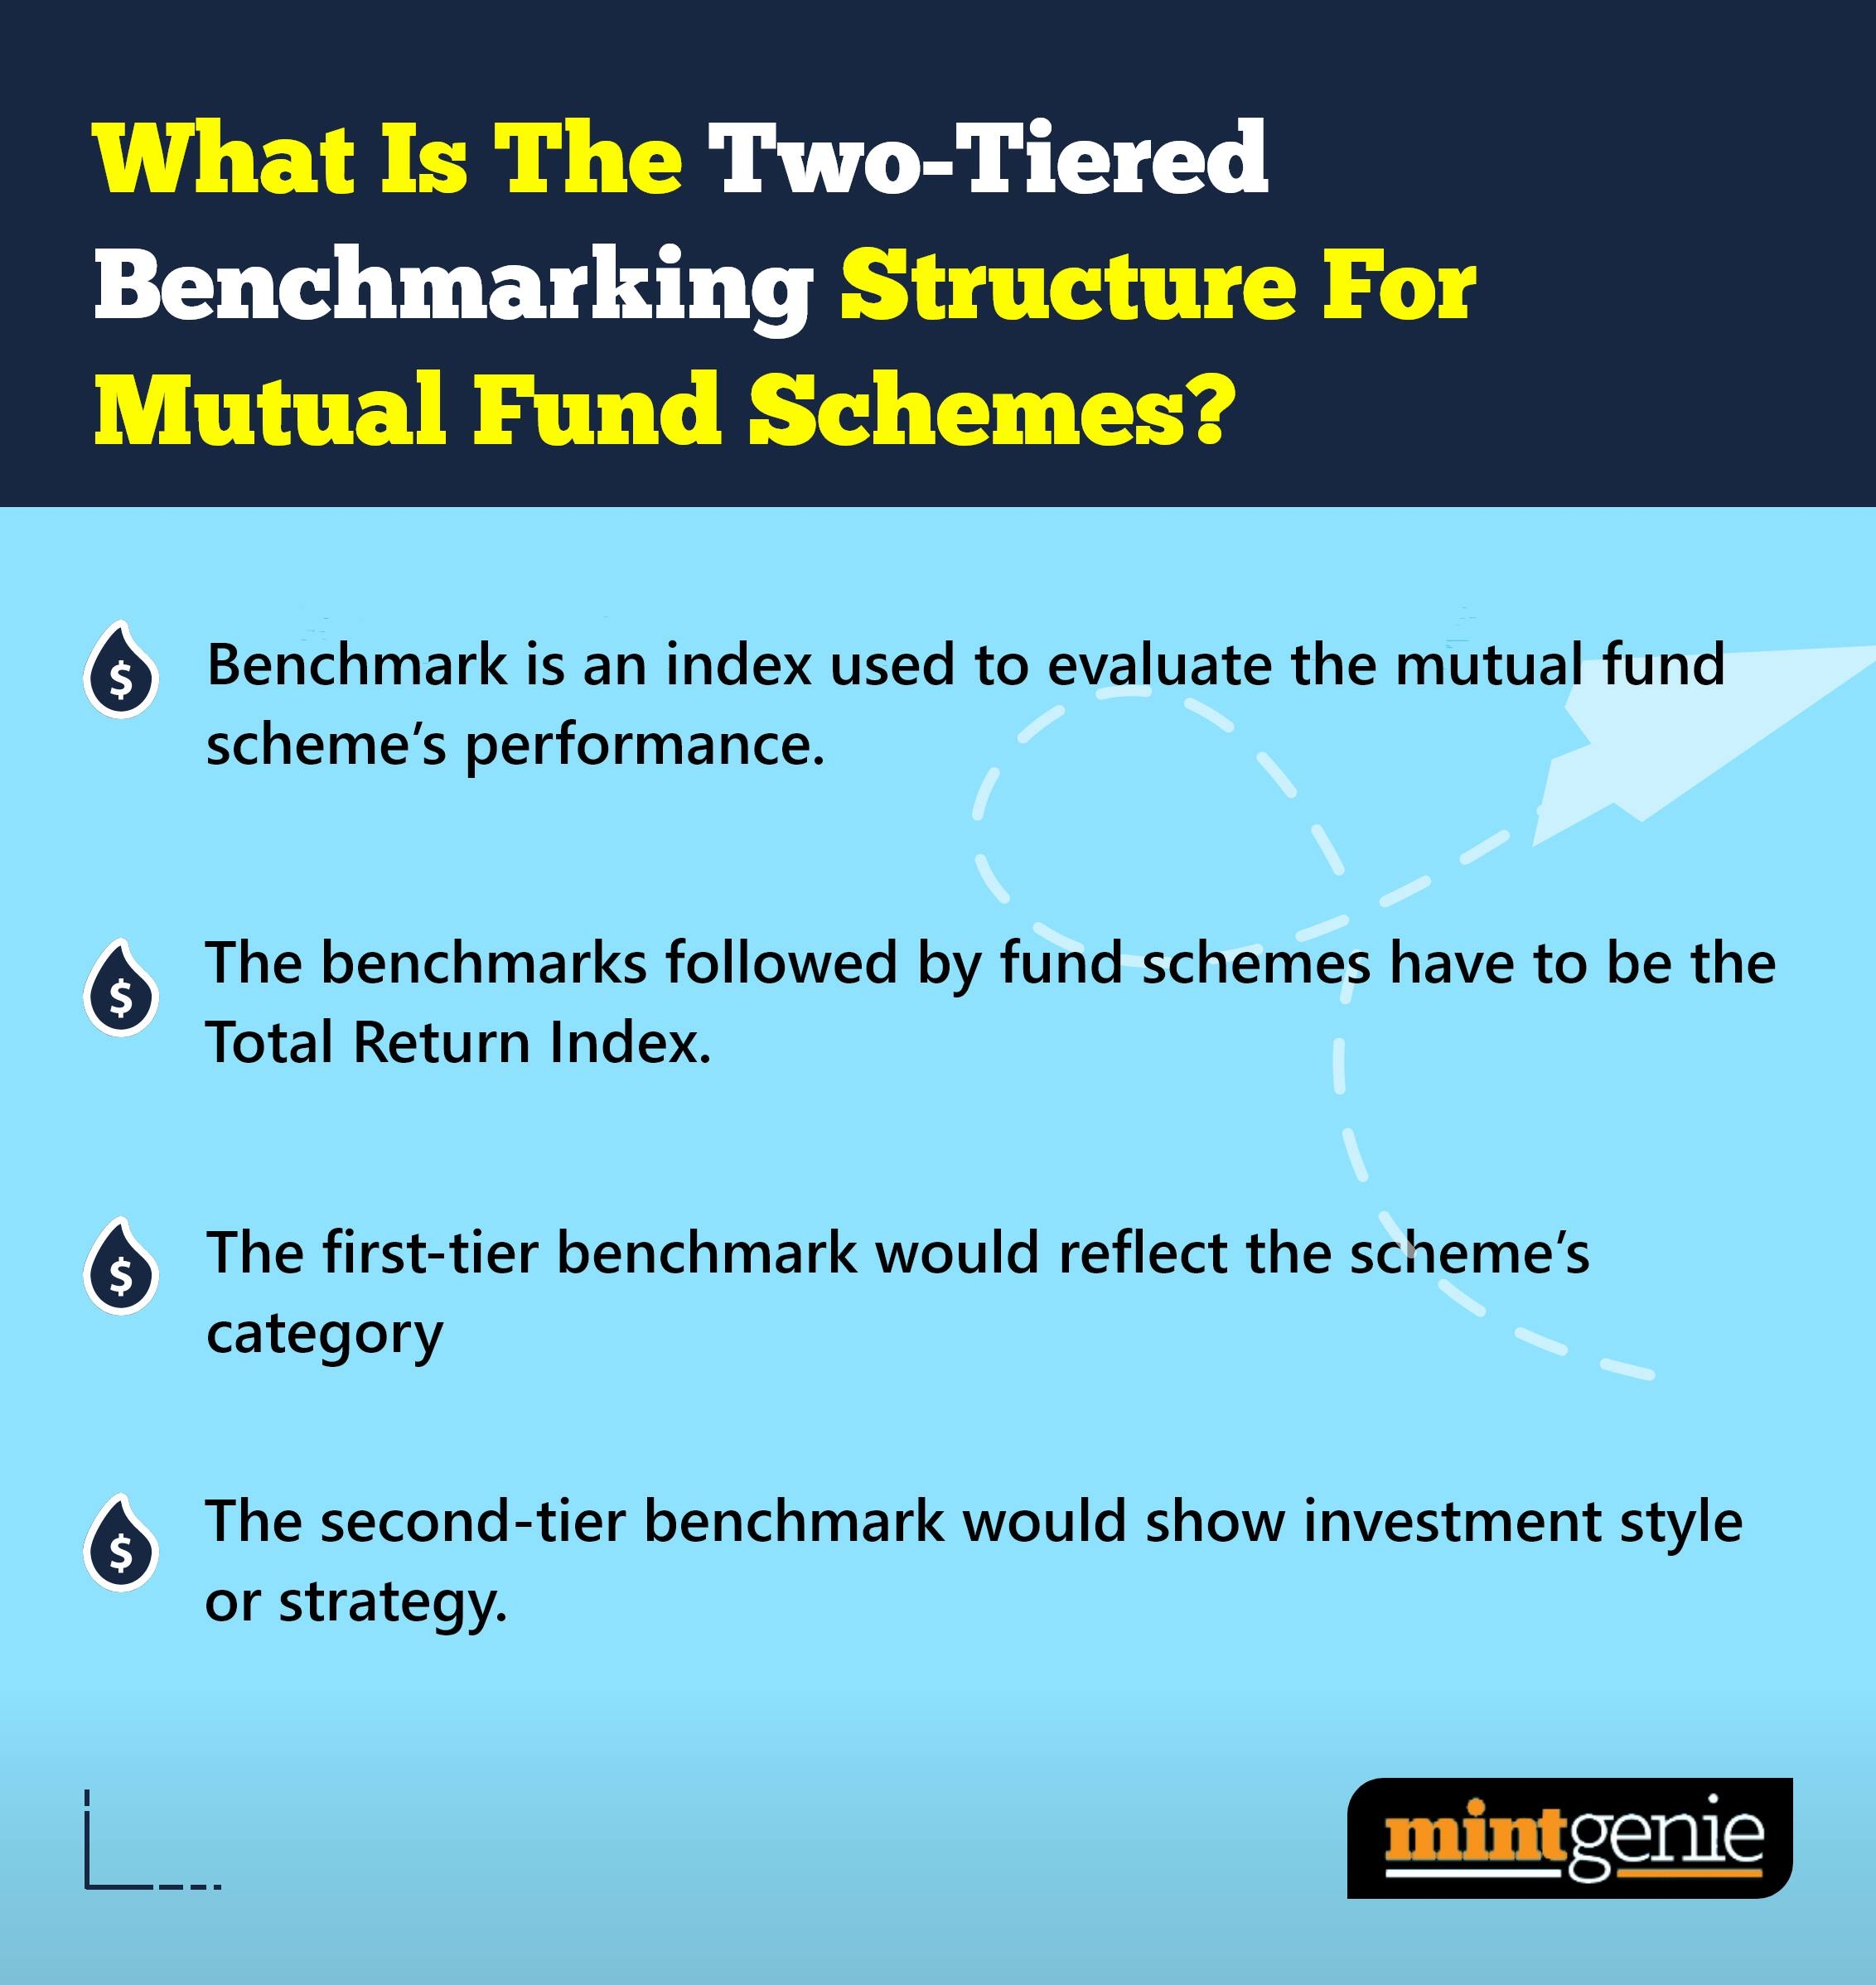 Two-tiered benchmarking structure for mutual fund schemes